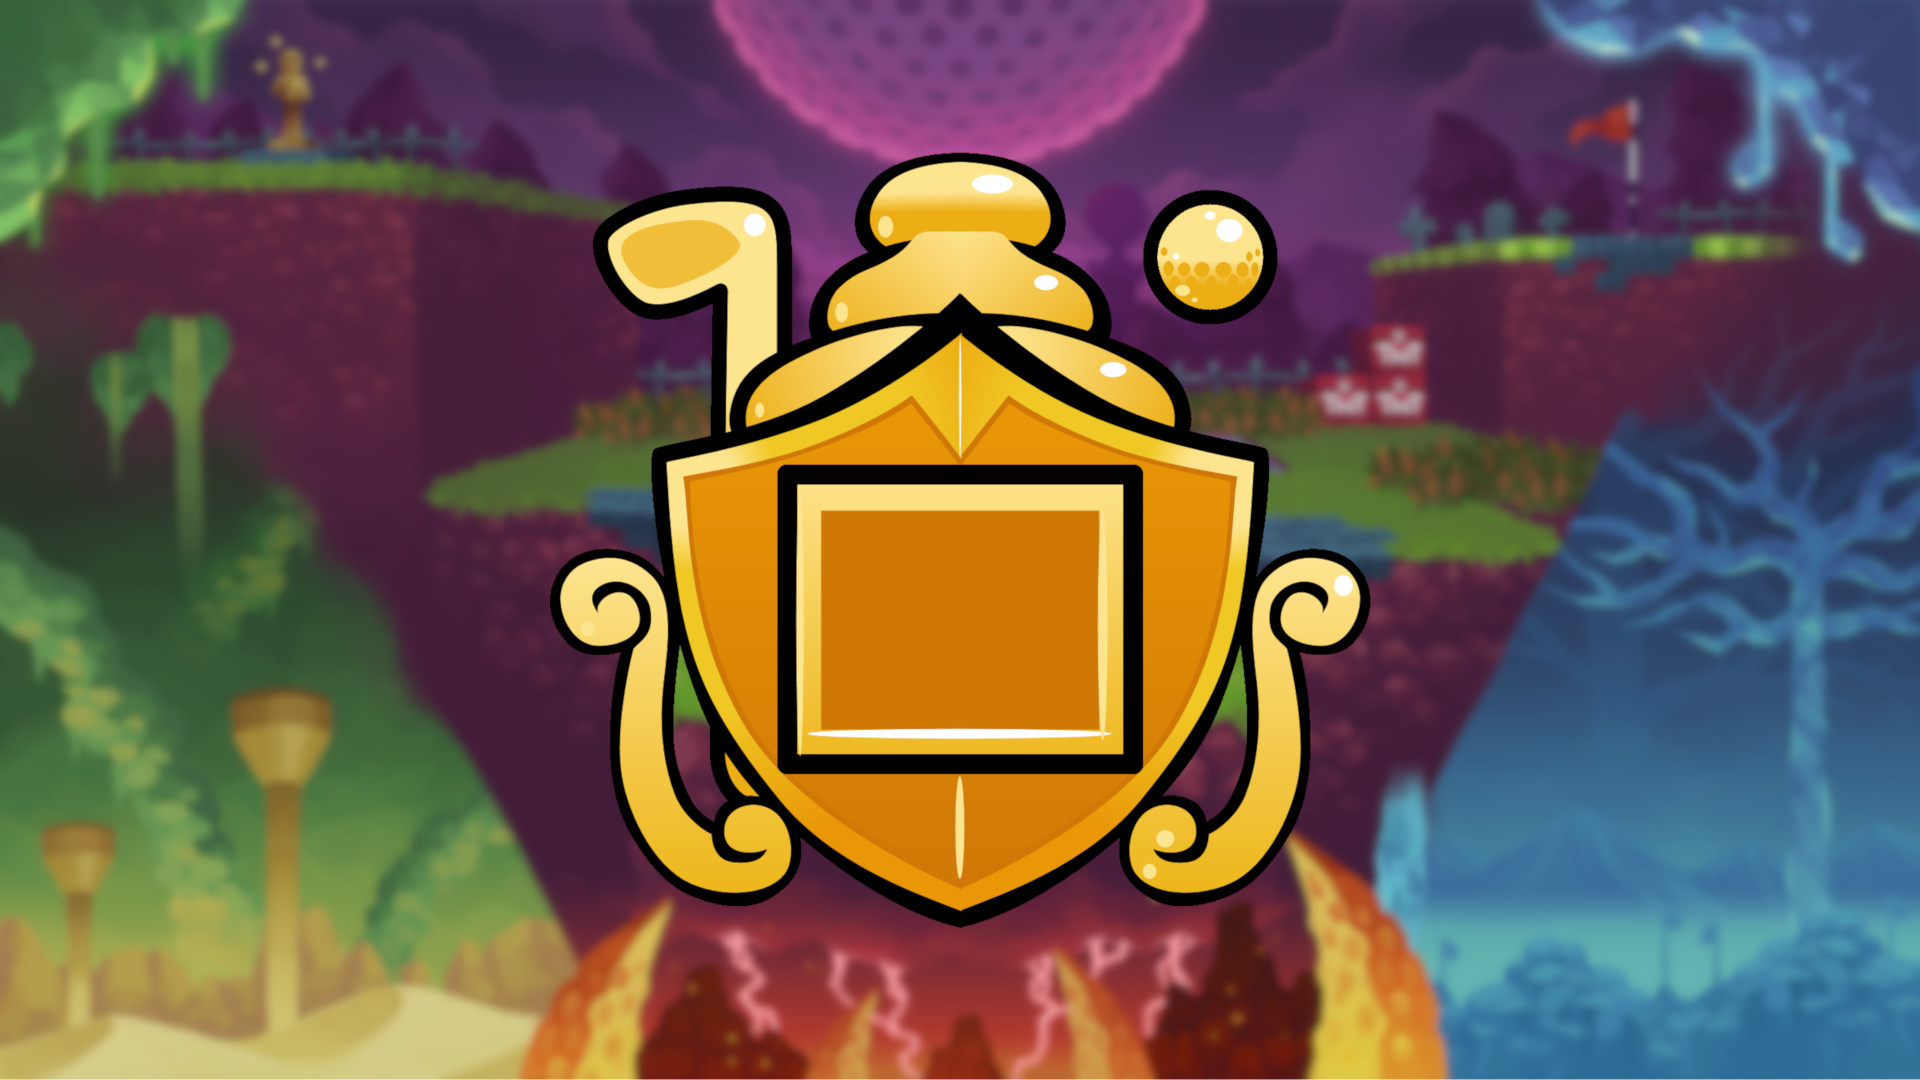 Icon for Hole in One